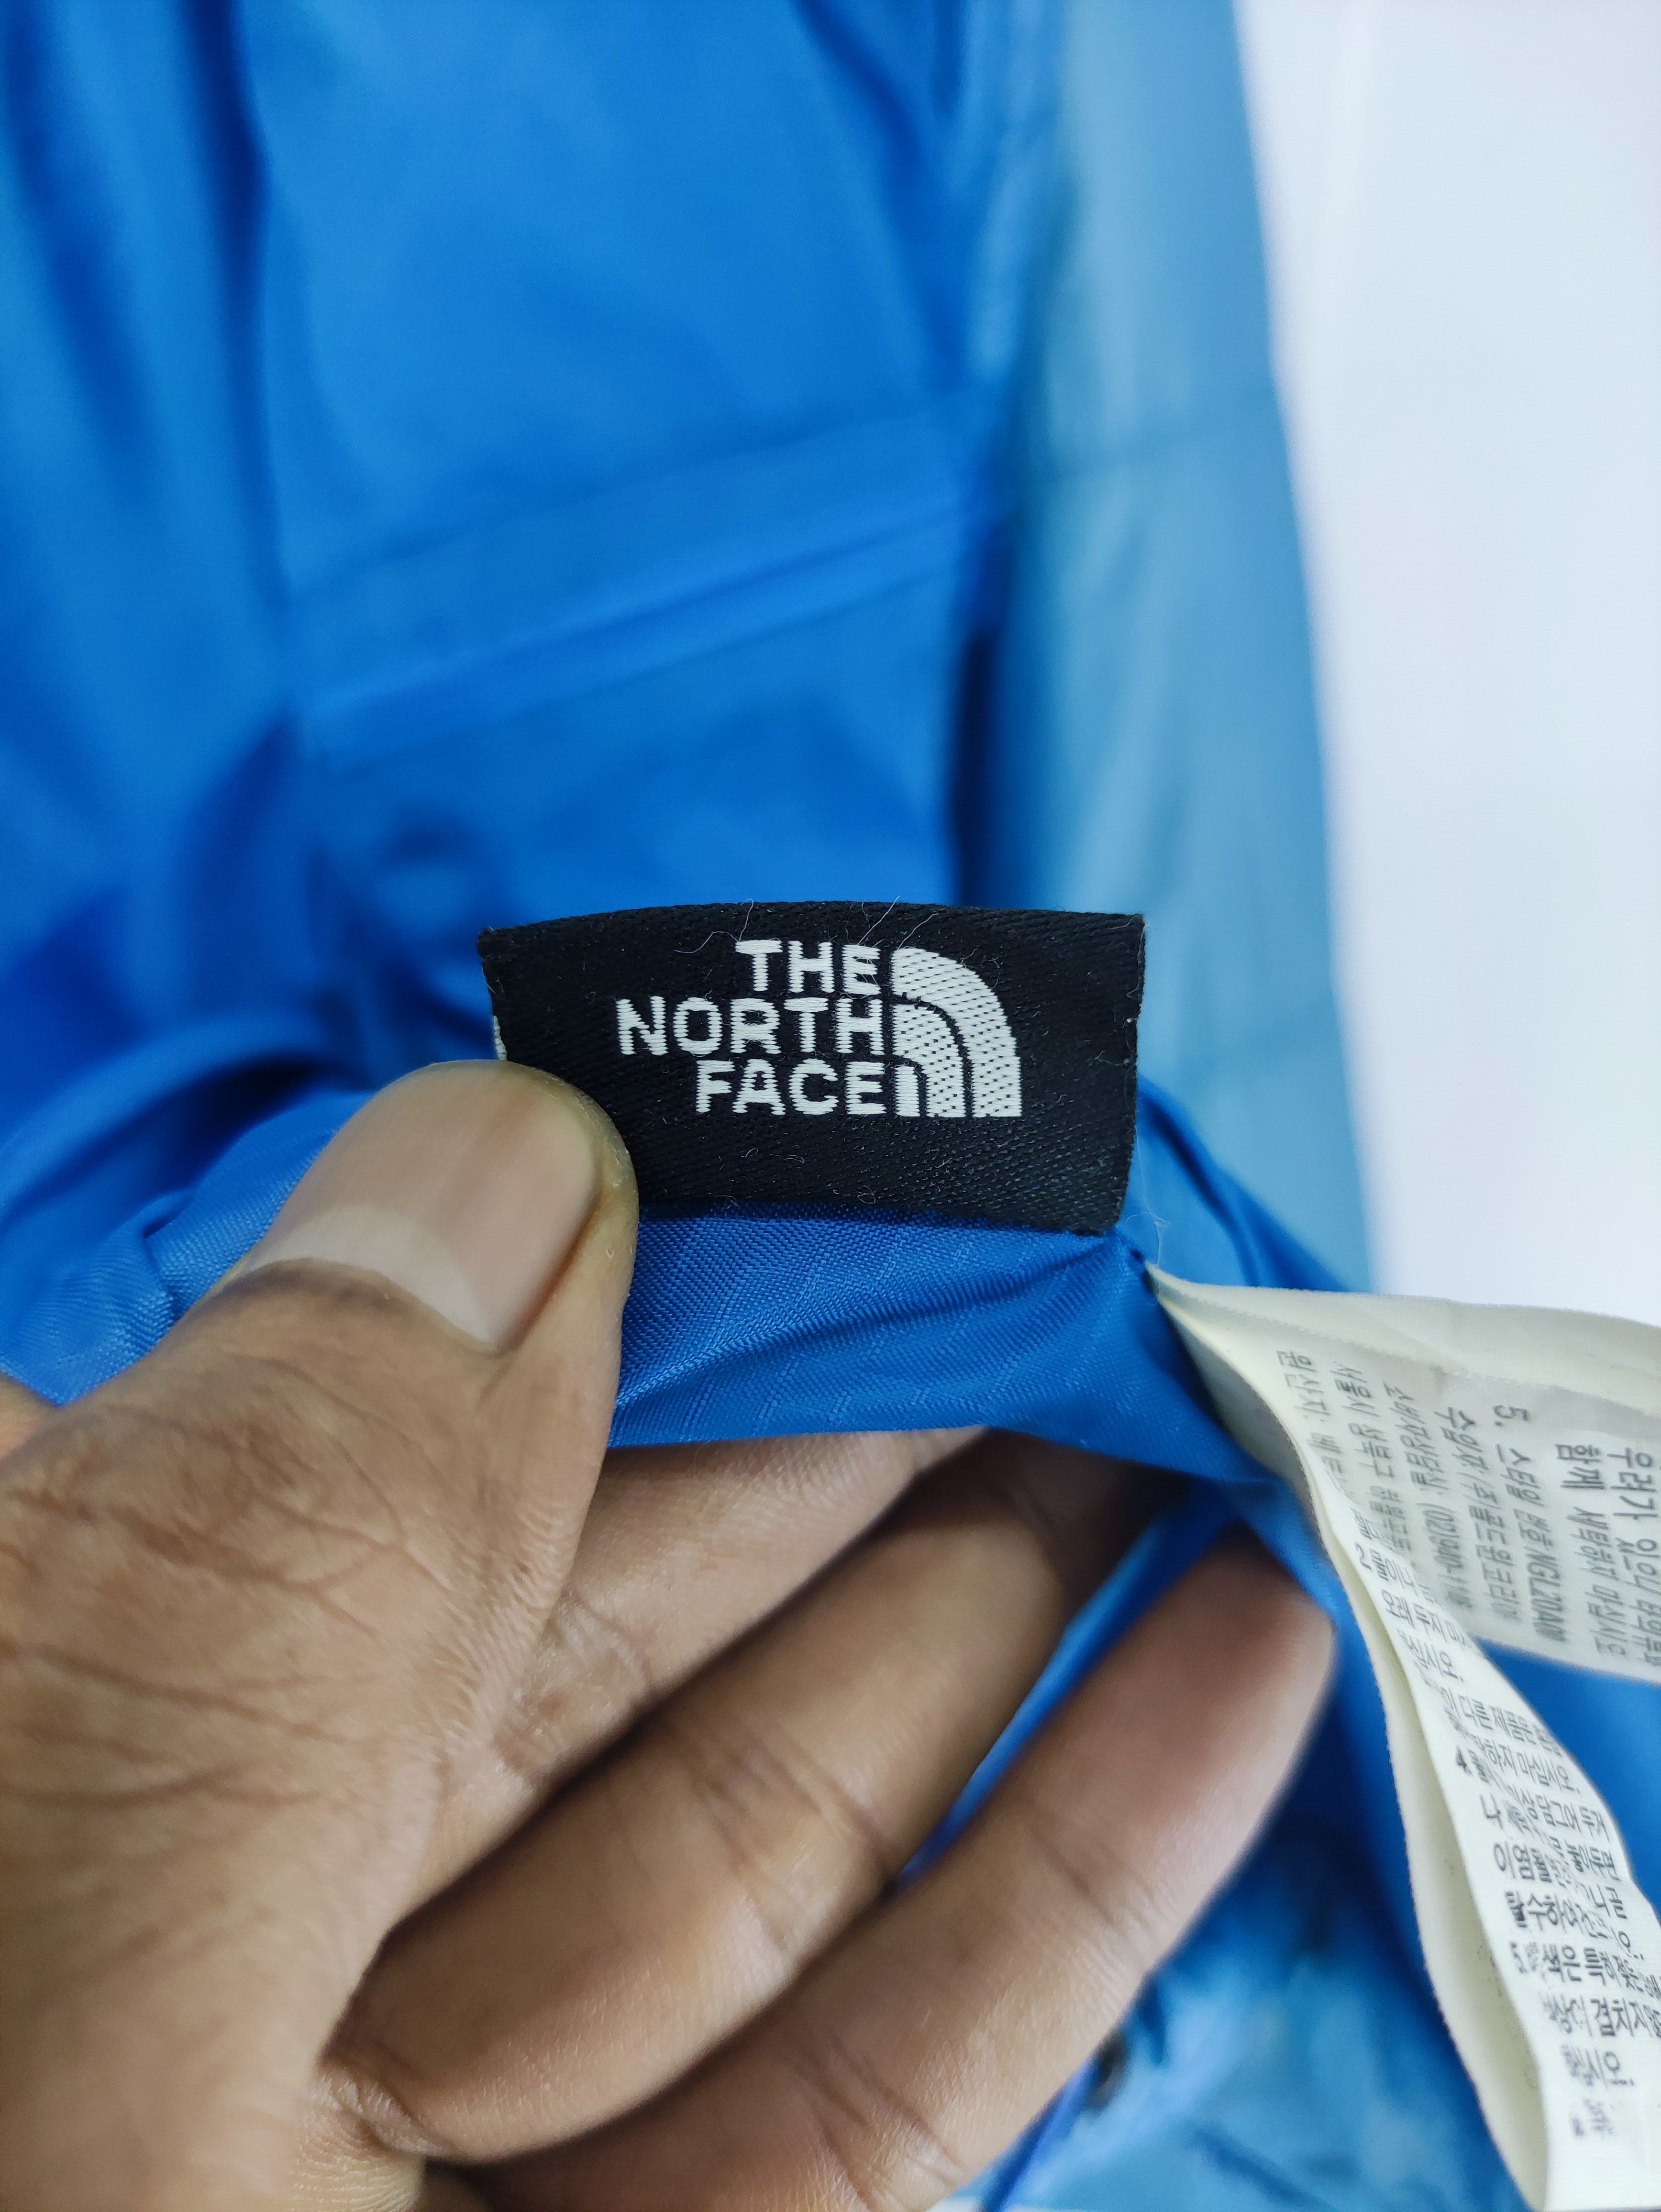 Outdoor Style Go Out! - The North Face Jacket Zipper - 10